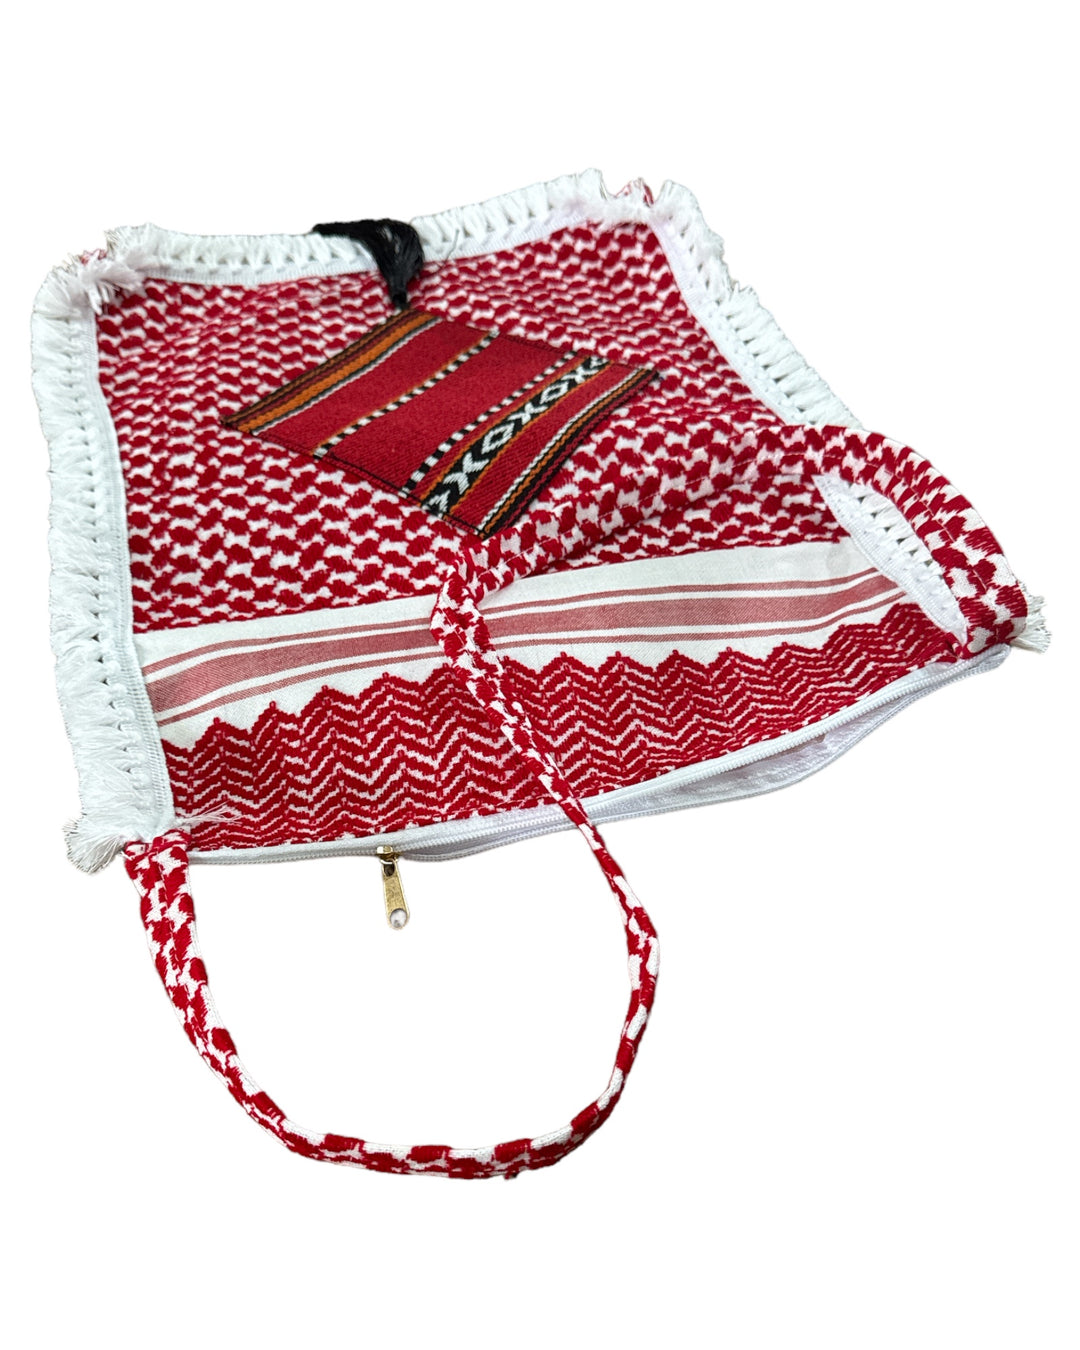 The Red & White Keffiyeh Handbag with Traditional Embroidery & Tarboosh 1– A Tapestry of Heritage and Style